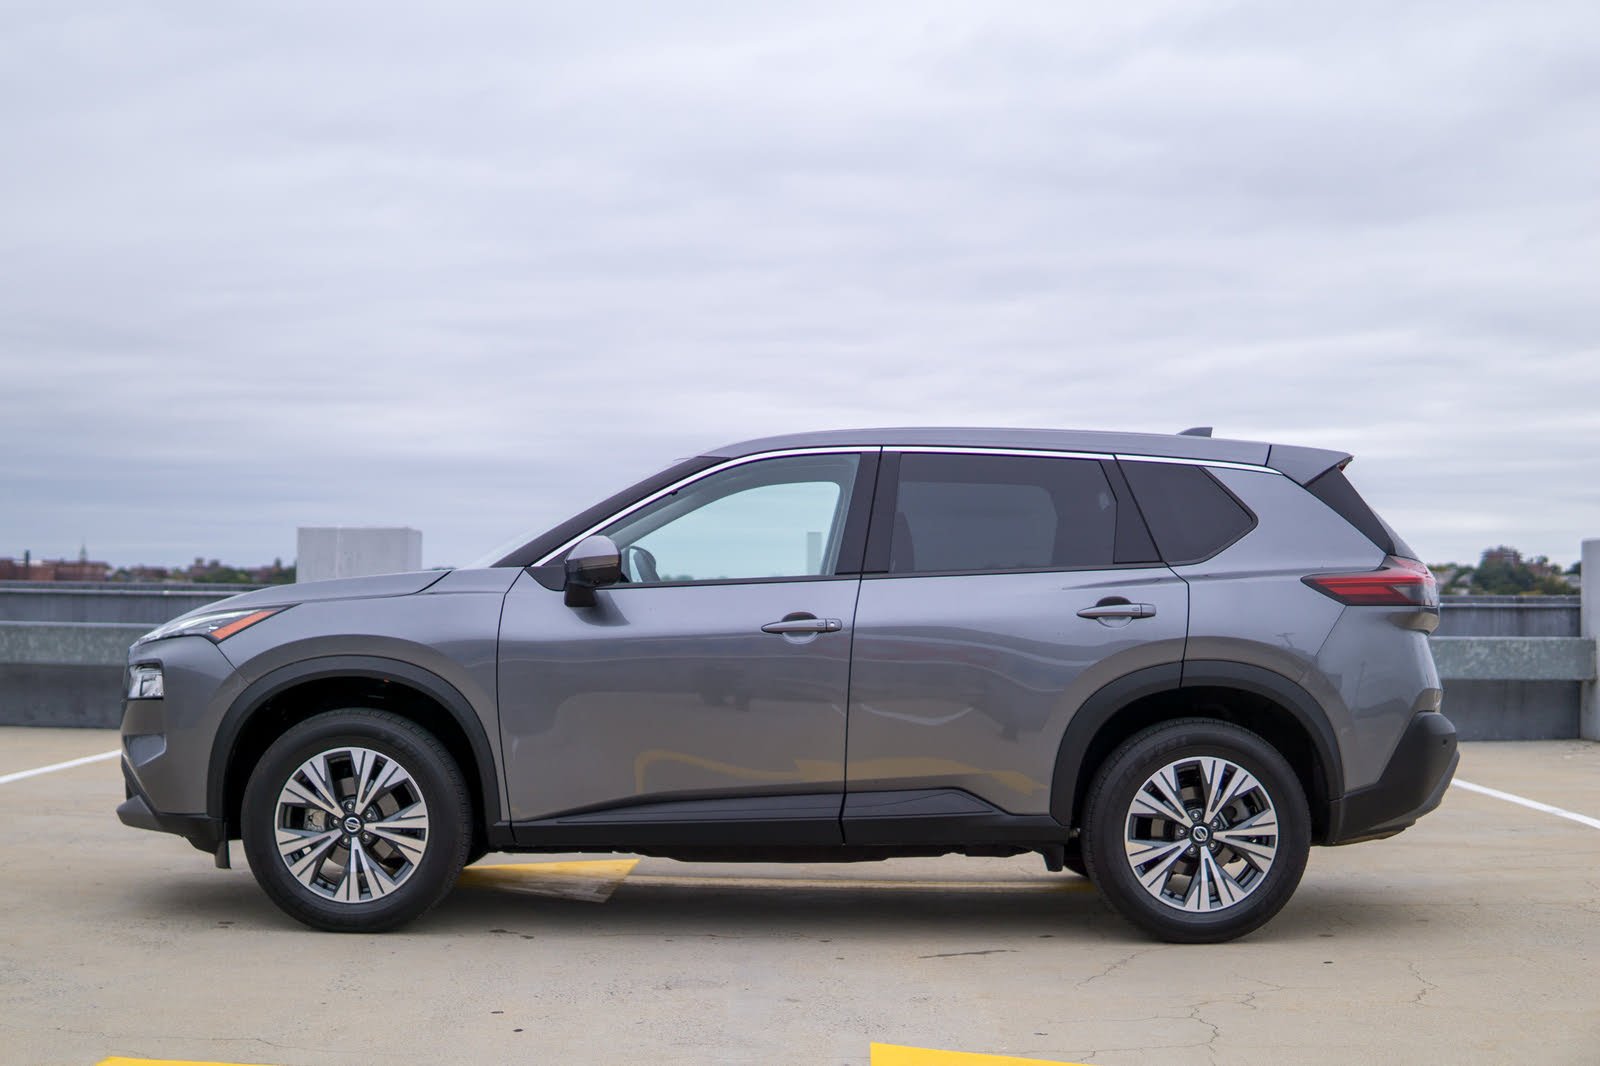 Nissan Rogue exterior - Side Profile